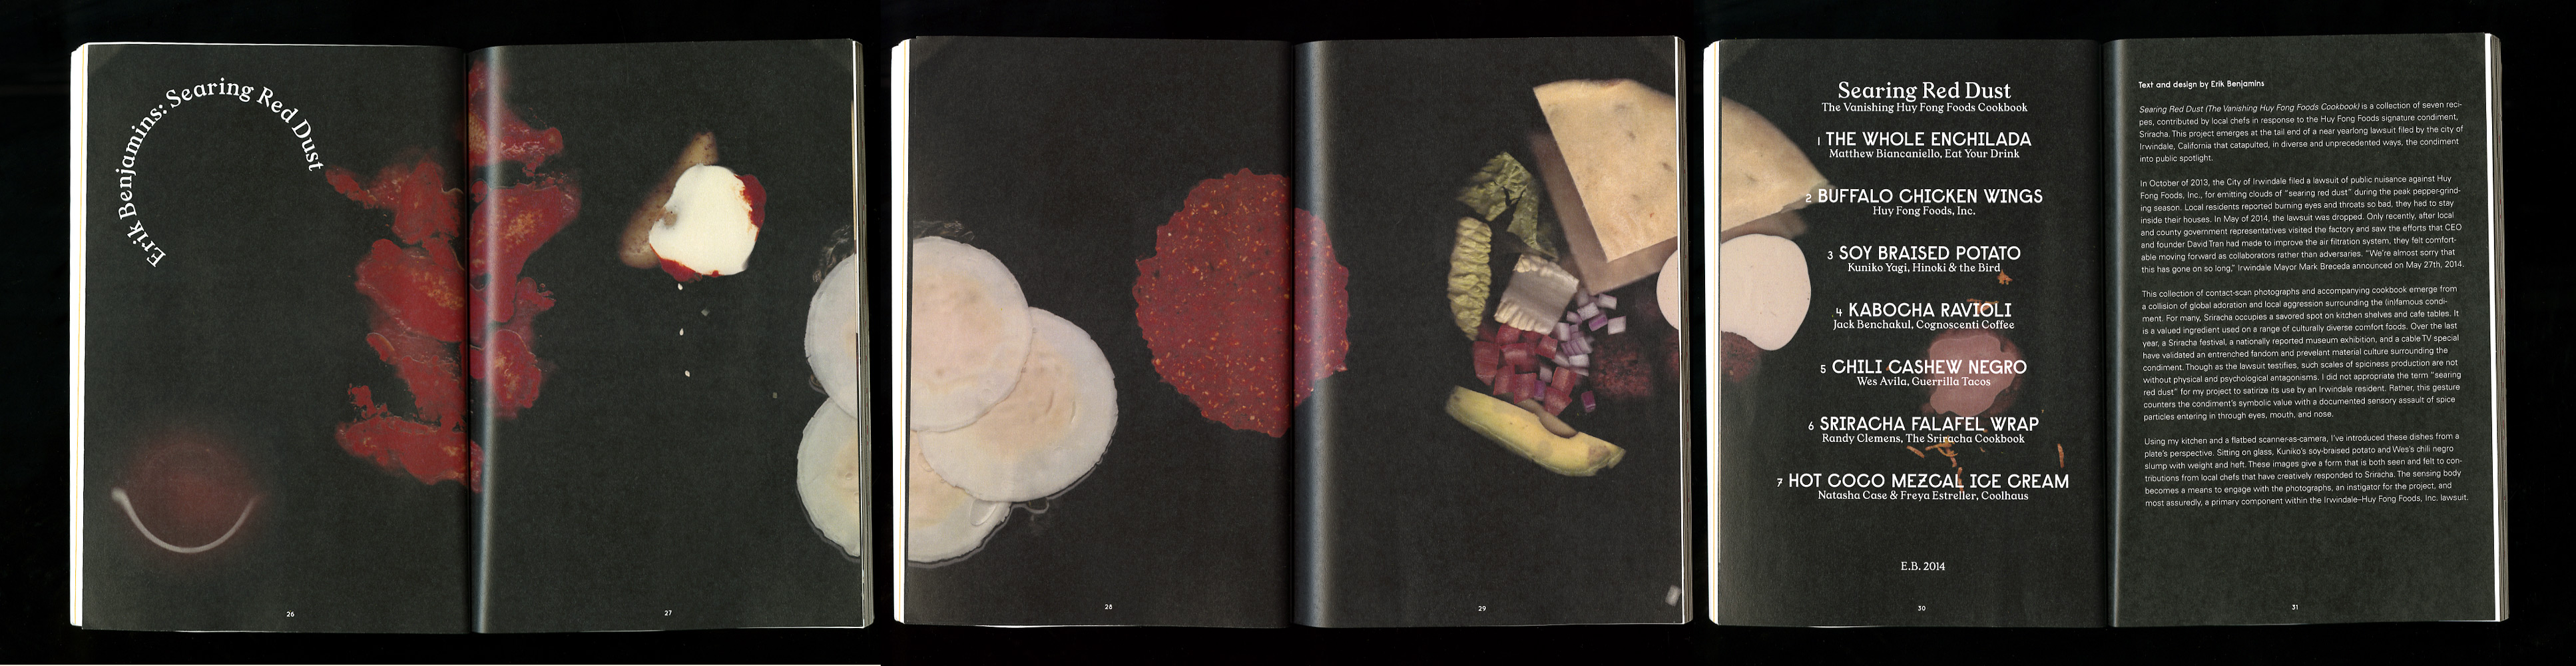 Searing Red Dust (The Vanishing Huy Fong Foods Cookbook), 2014